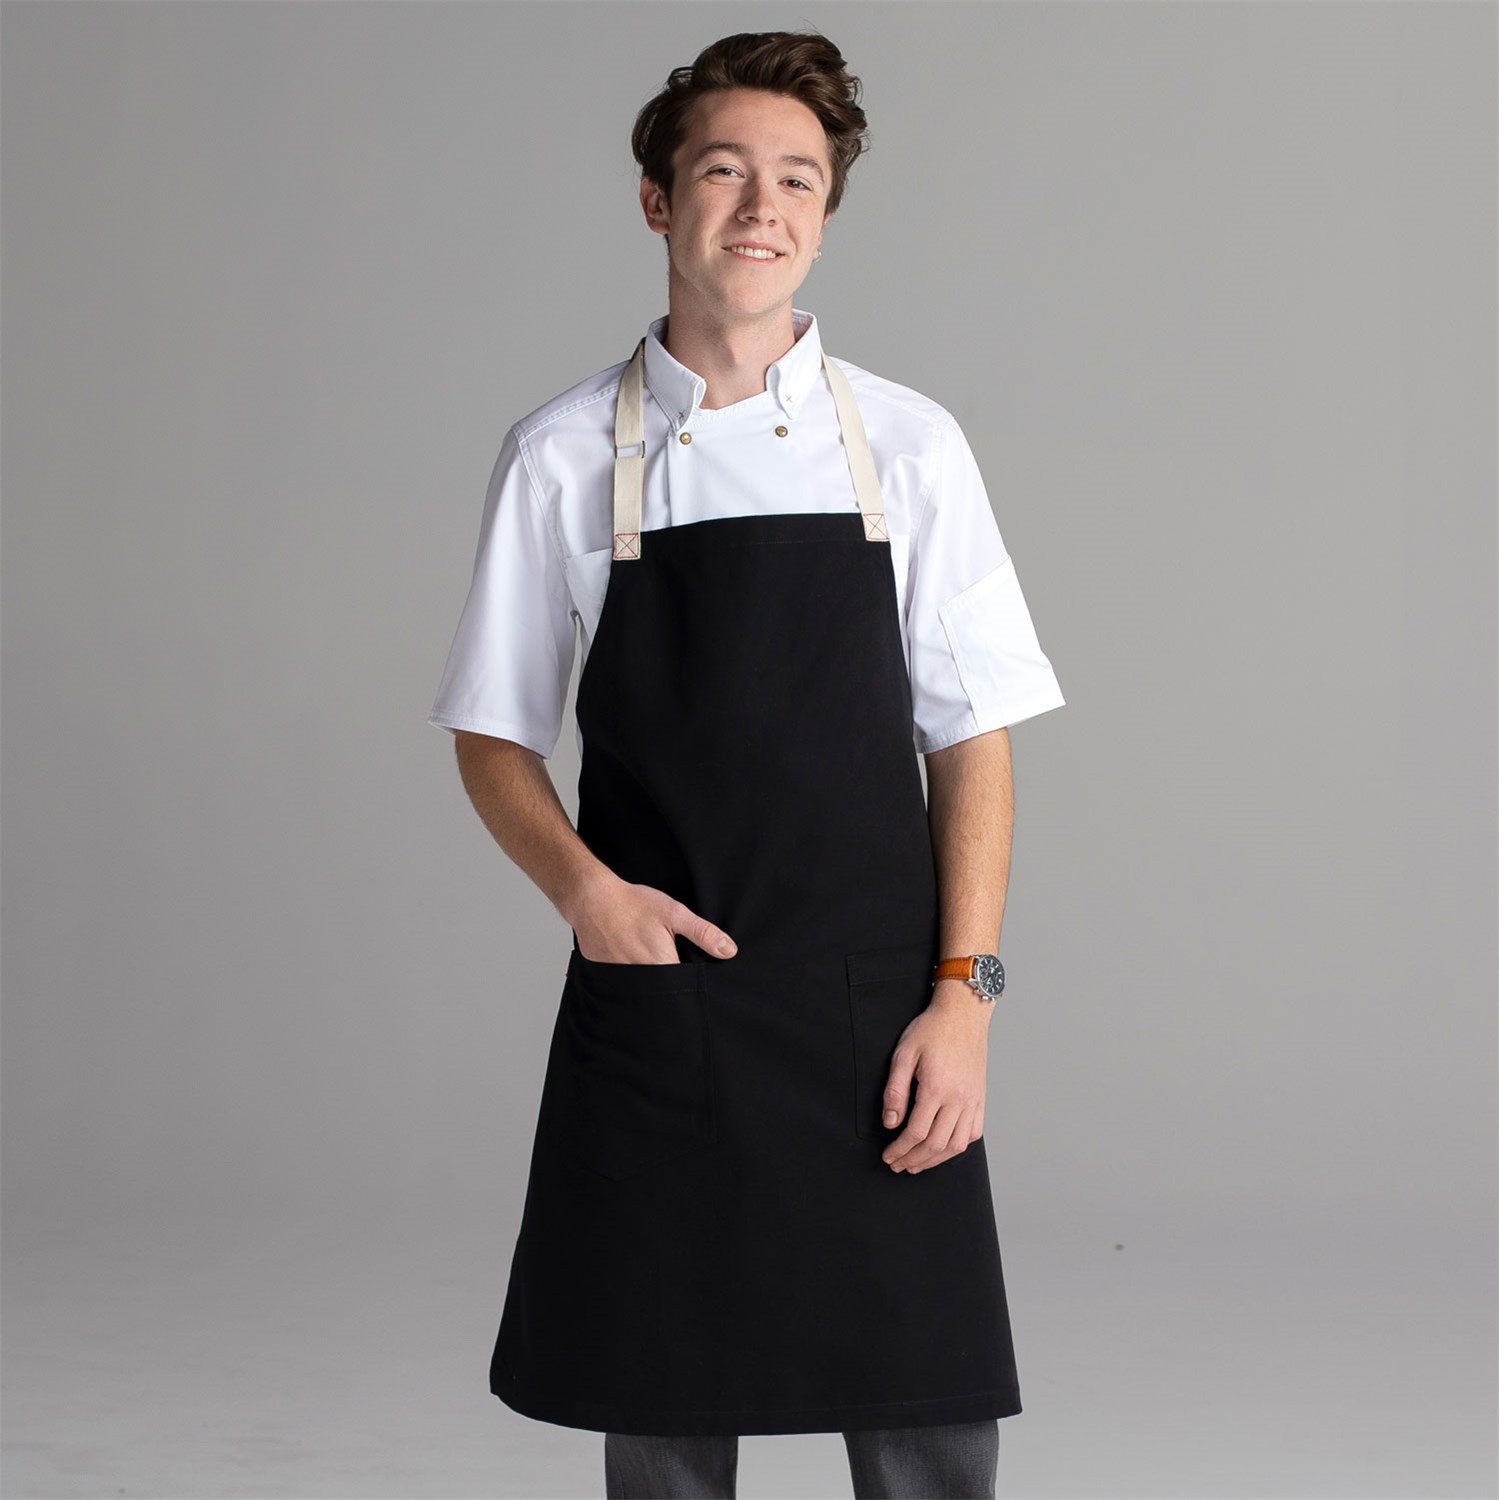 Chefwear Black Bib Apron for Chefs and Cooks, Chef Wear Style CW1692